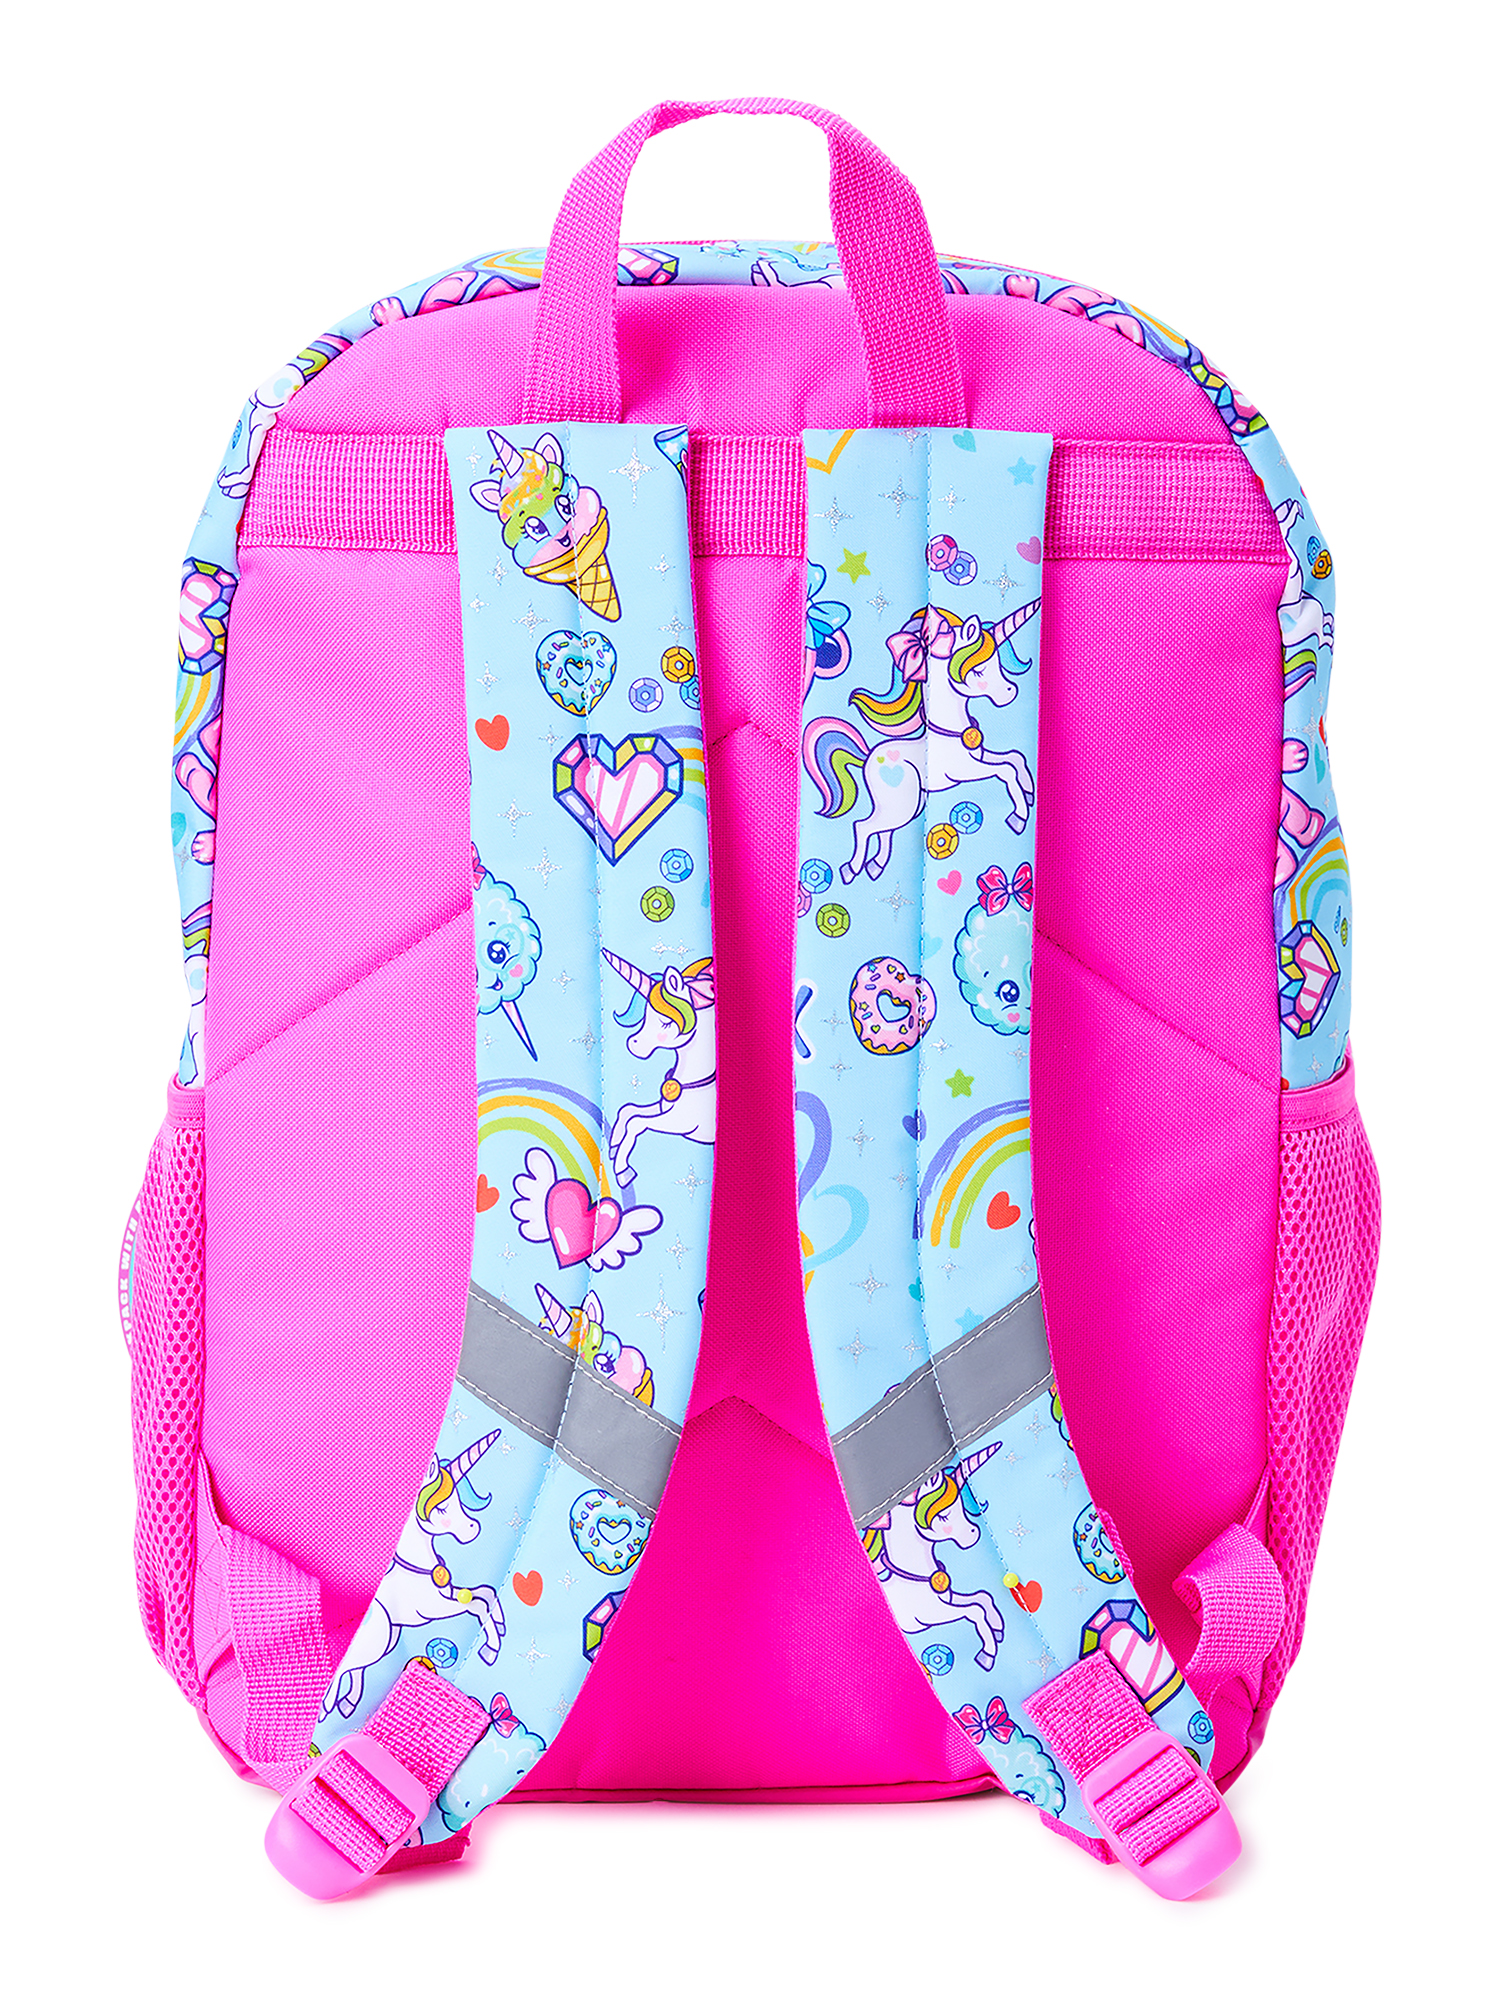 Jojo Siwa Rockin Rainbow Girls 17" Laptop Backpack 2-Piece Set with Lunch Tote Bag, Pink Multi-Color - image 4 of 4